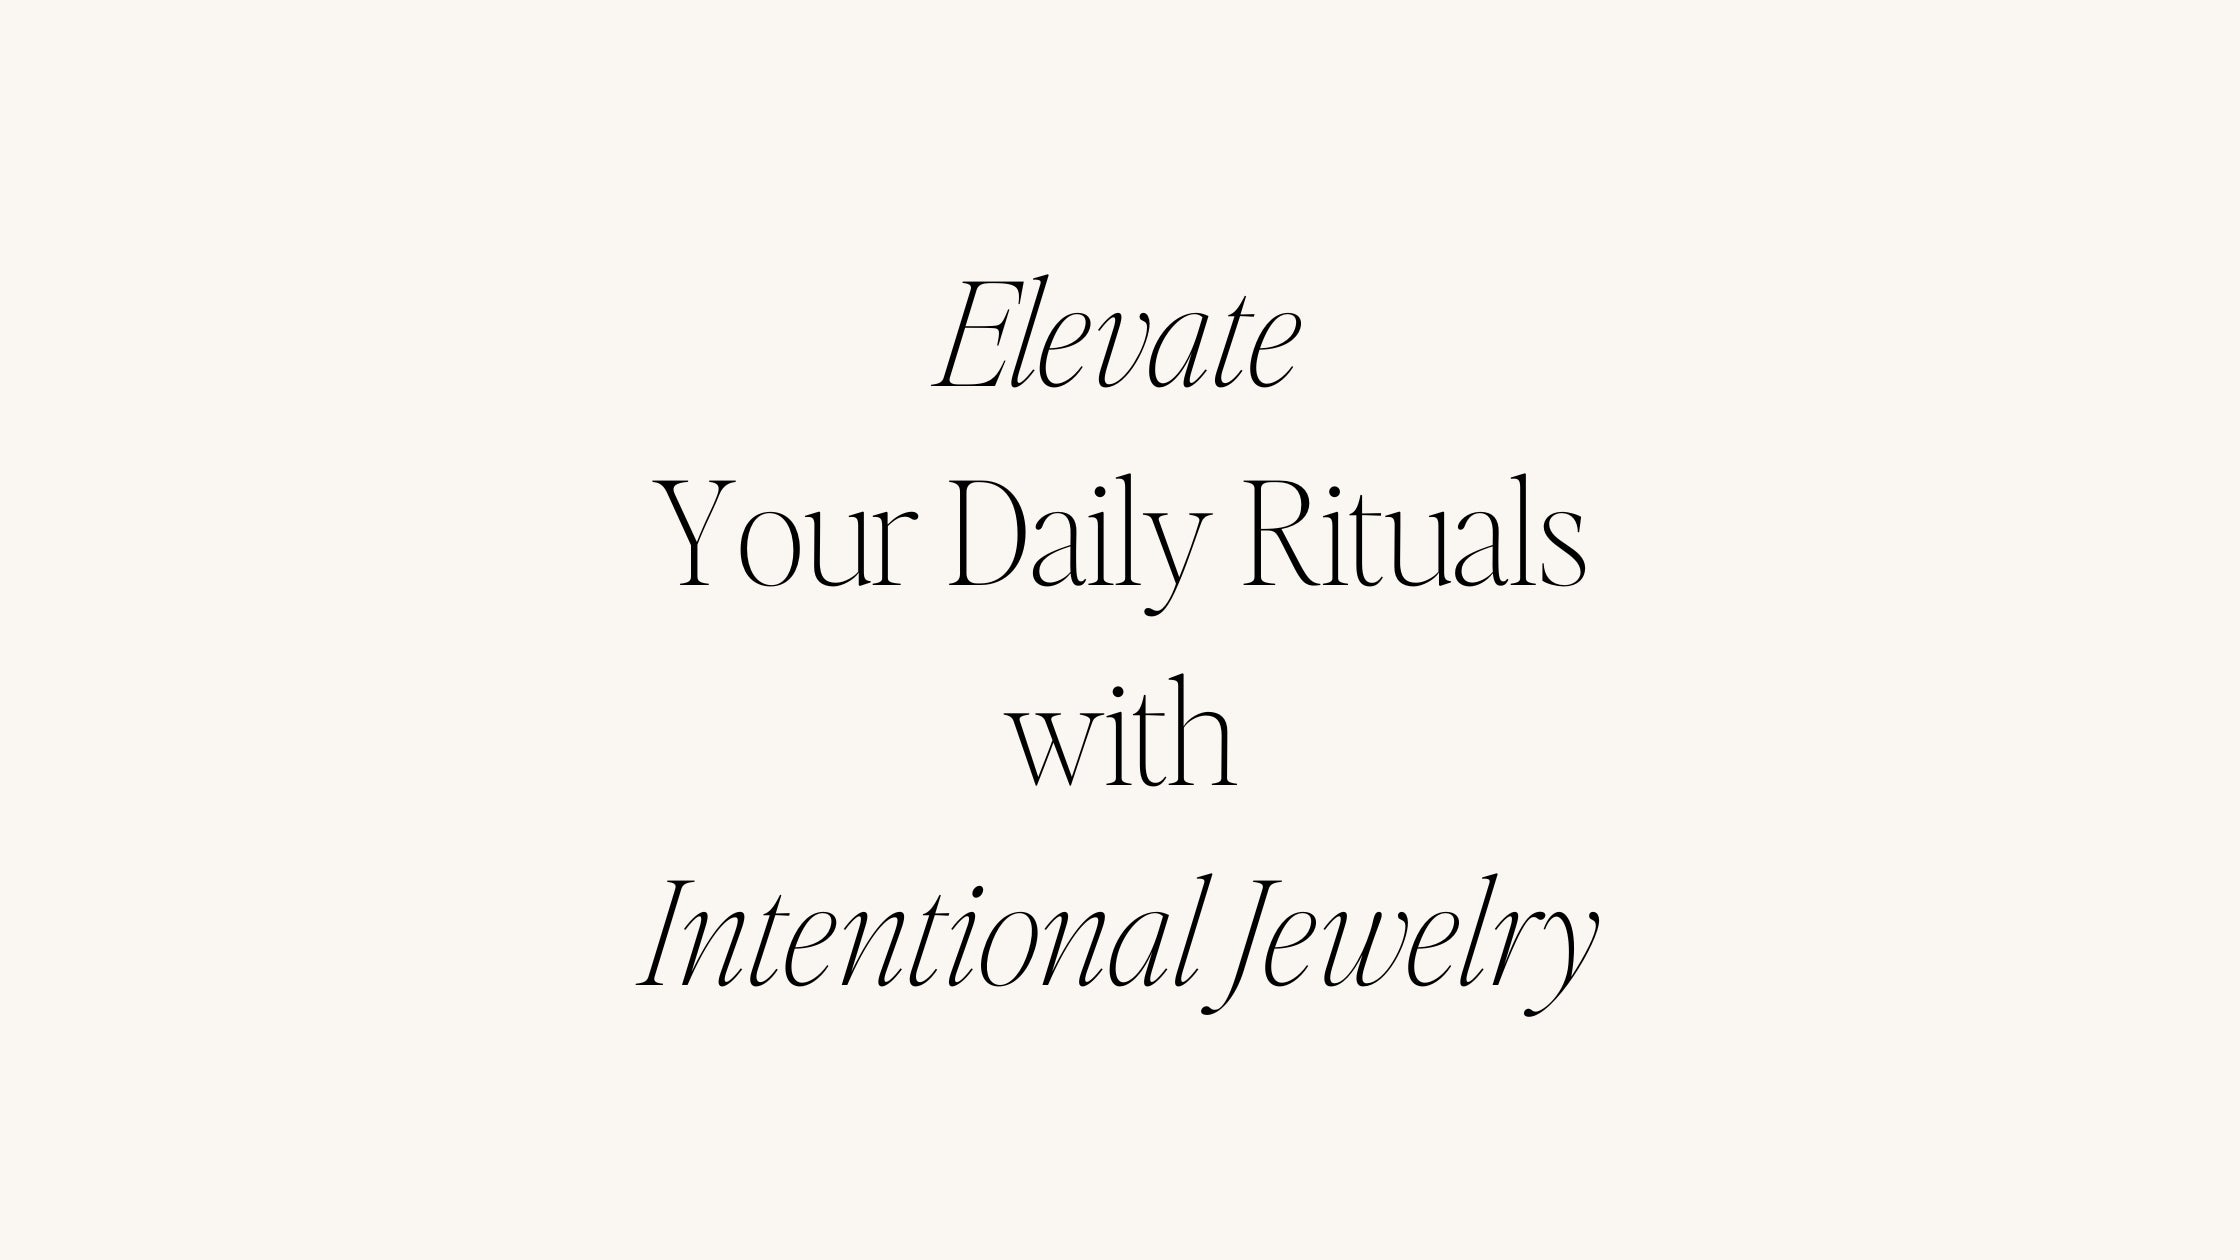 From Self-Care to Soul Care: Elevate Your Daily Rituals with Intentional Jewelry